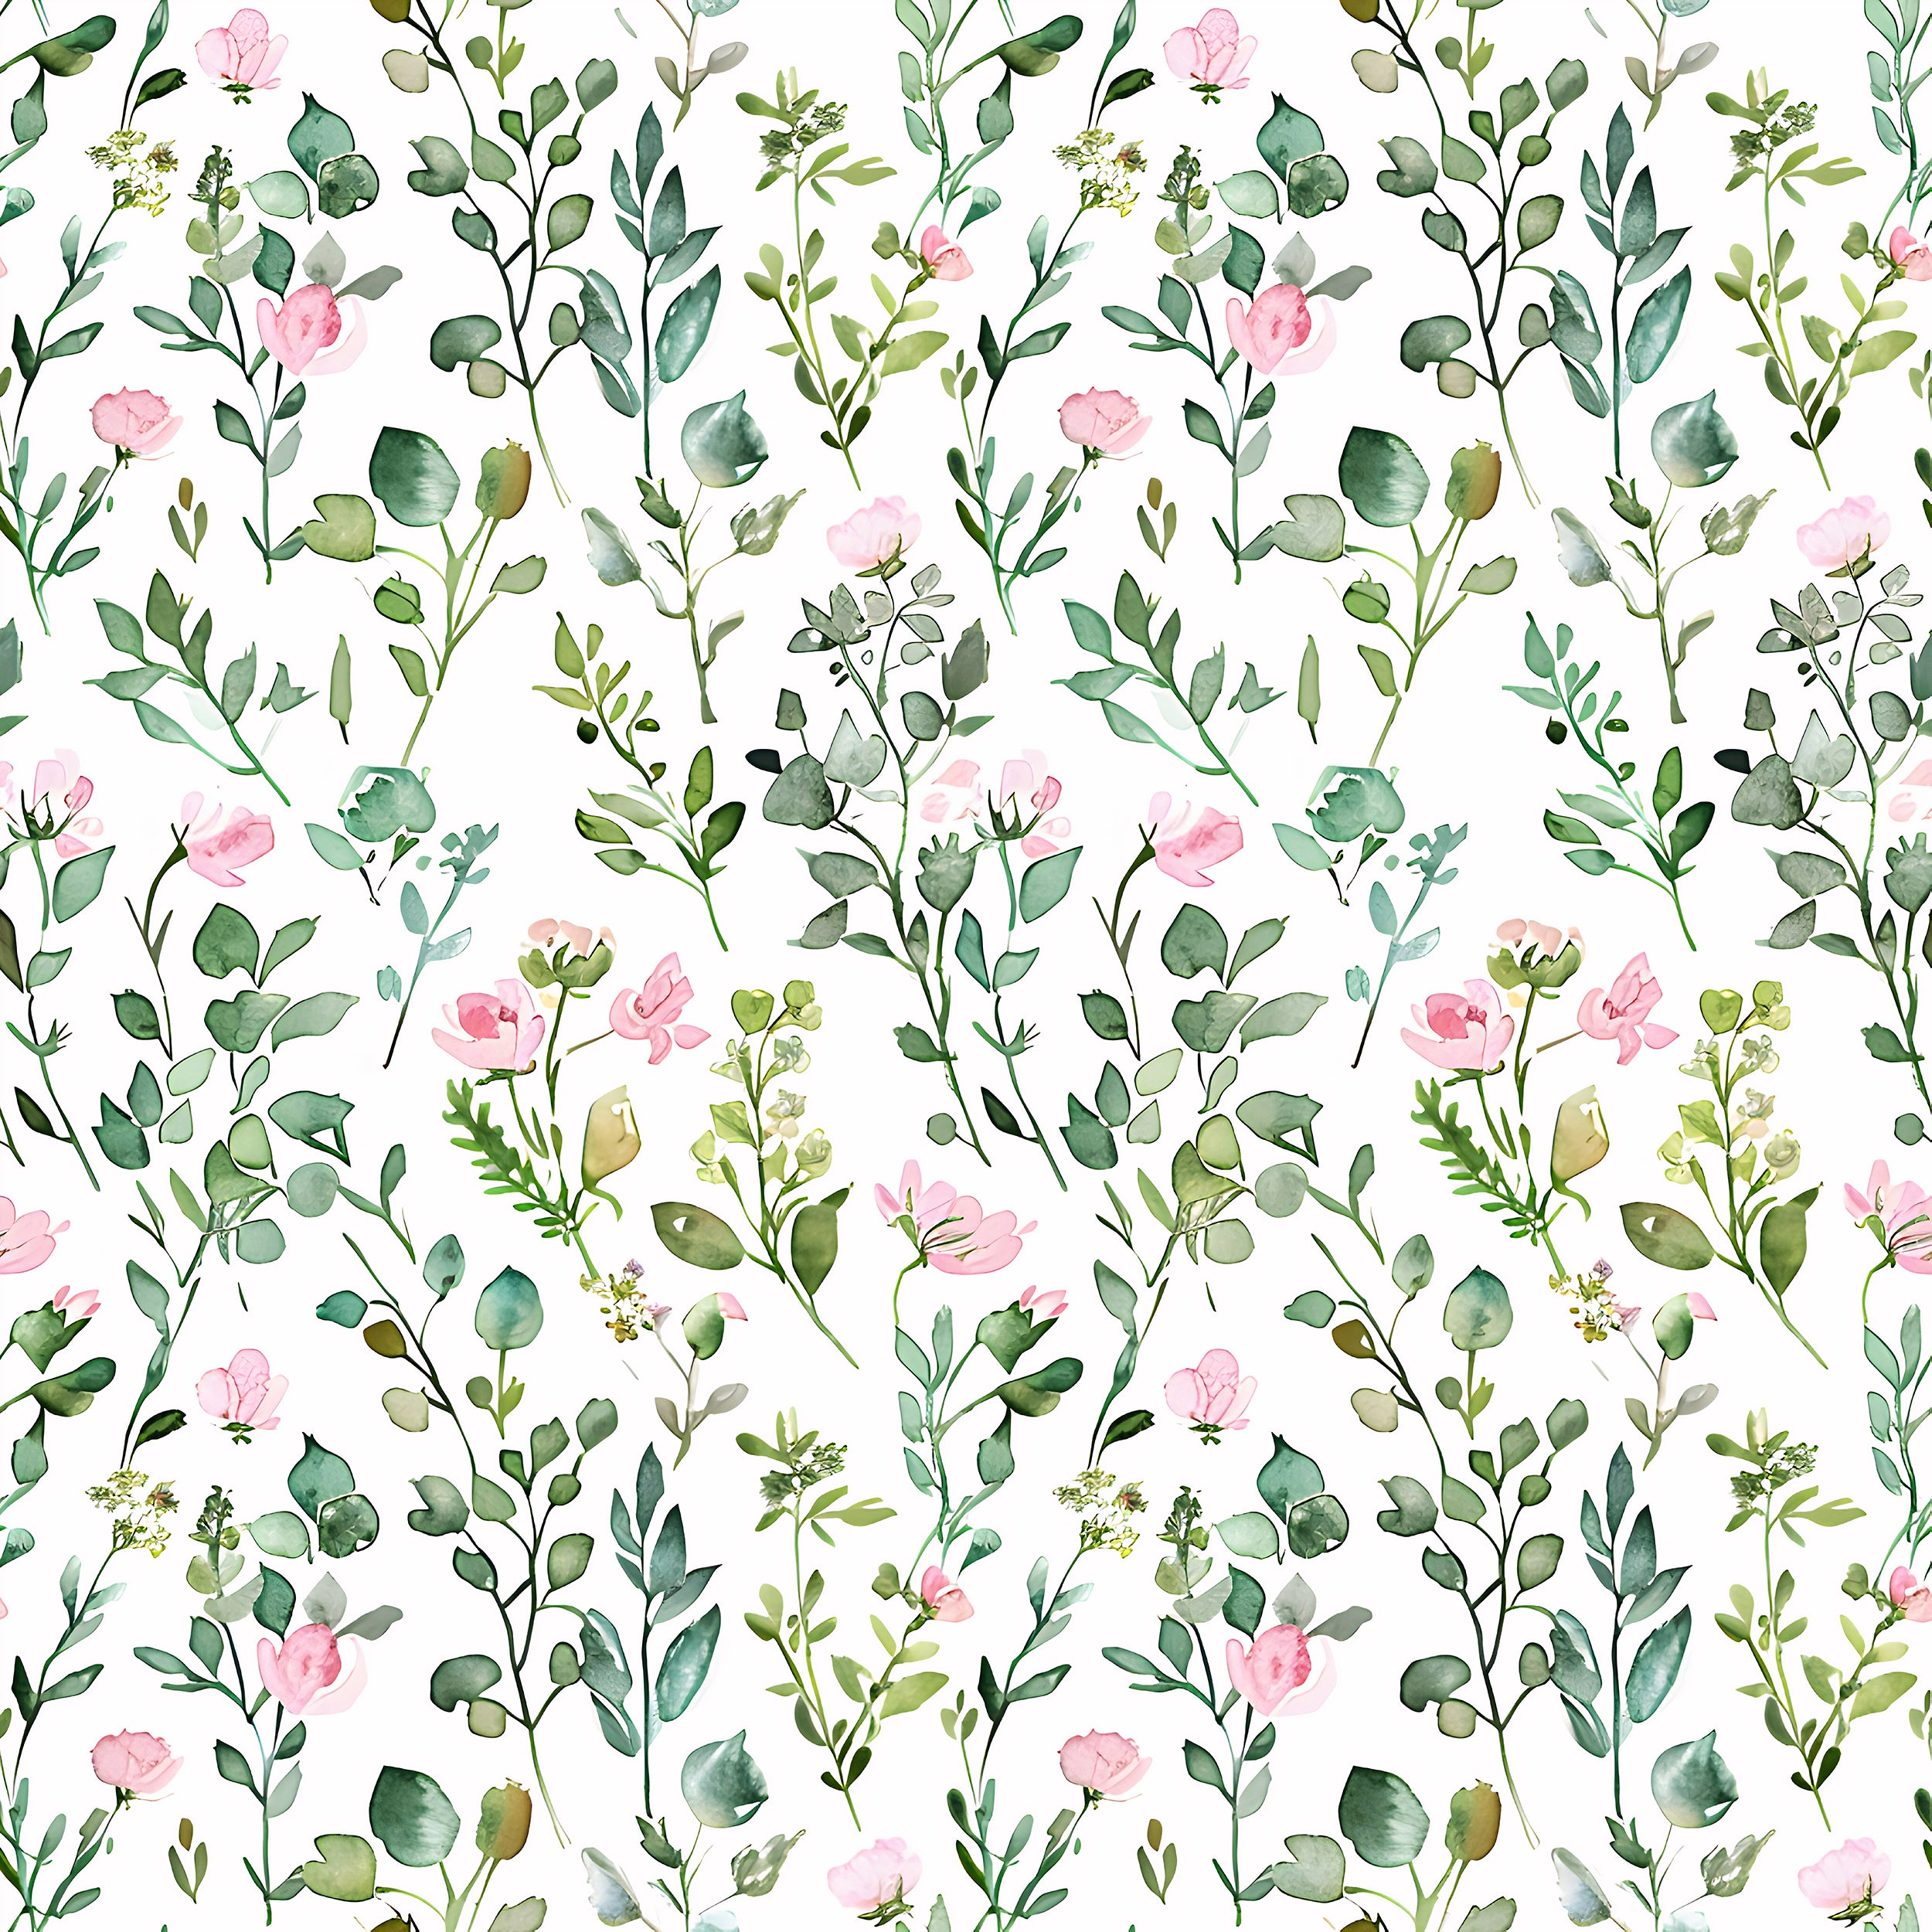 Removable Wildflower Wallpaper, Delicate Floral Peel and Stick Design Tranquil Meadow Flowers Wall Mural, Peel and Stick Floral Decor